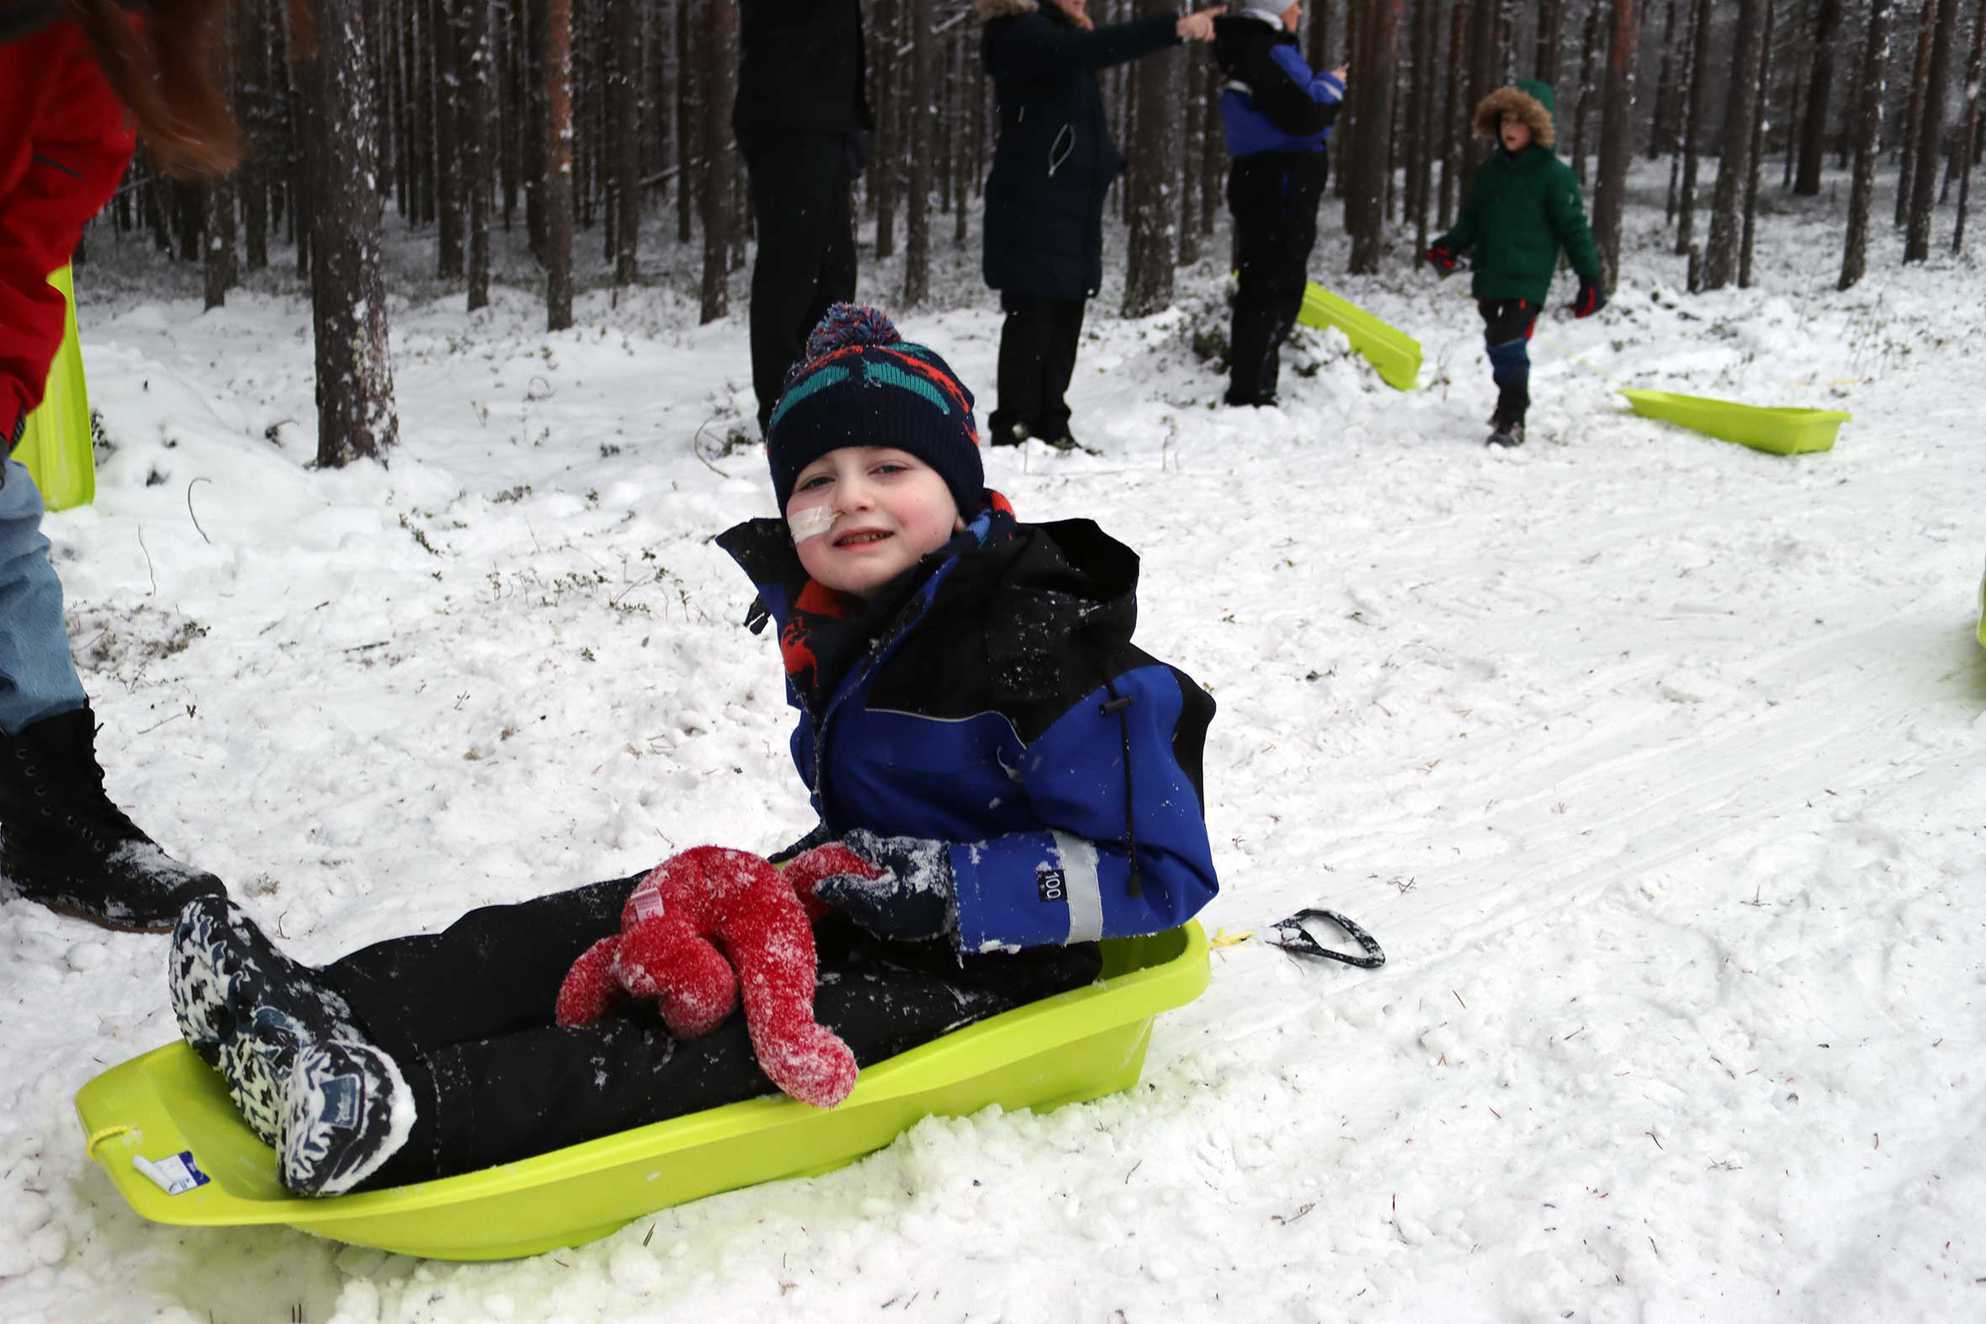 Tíernan sledging in the snow, during his trip to Lapland.